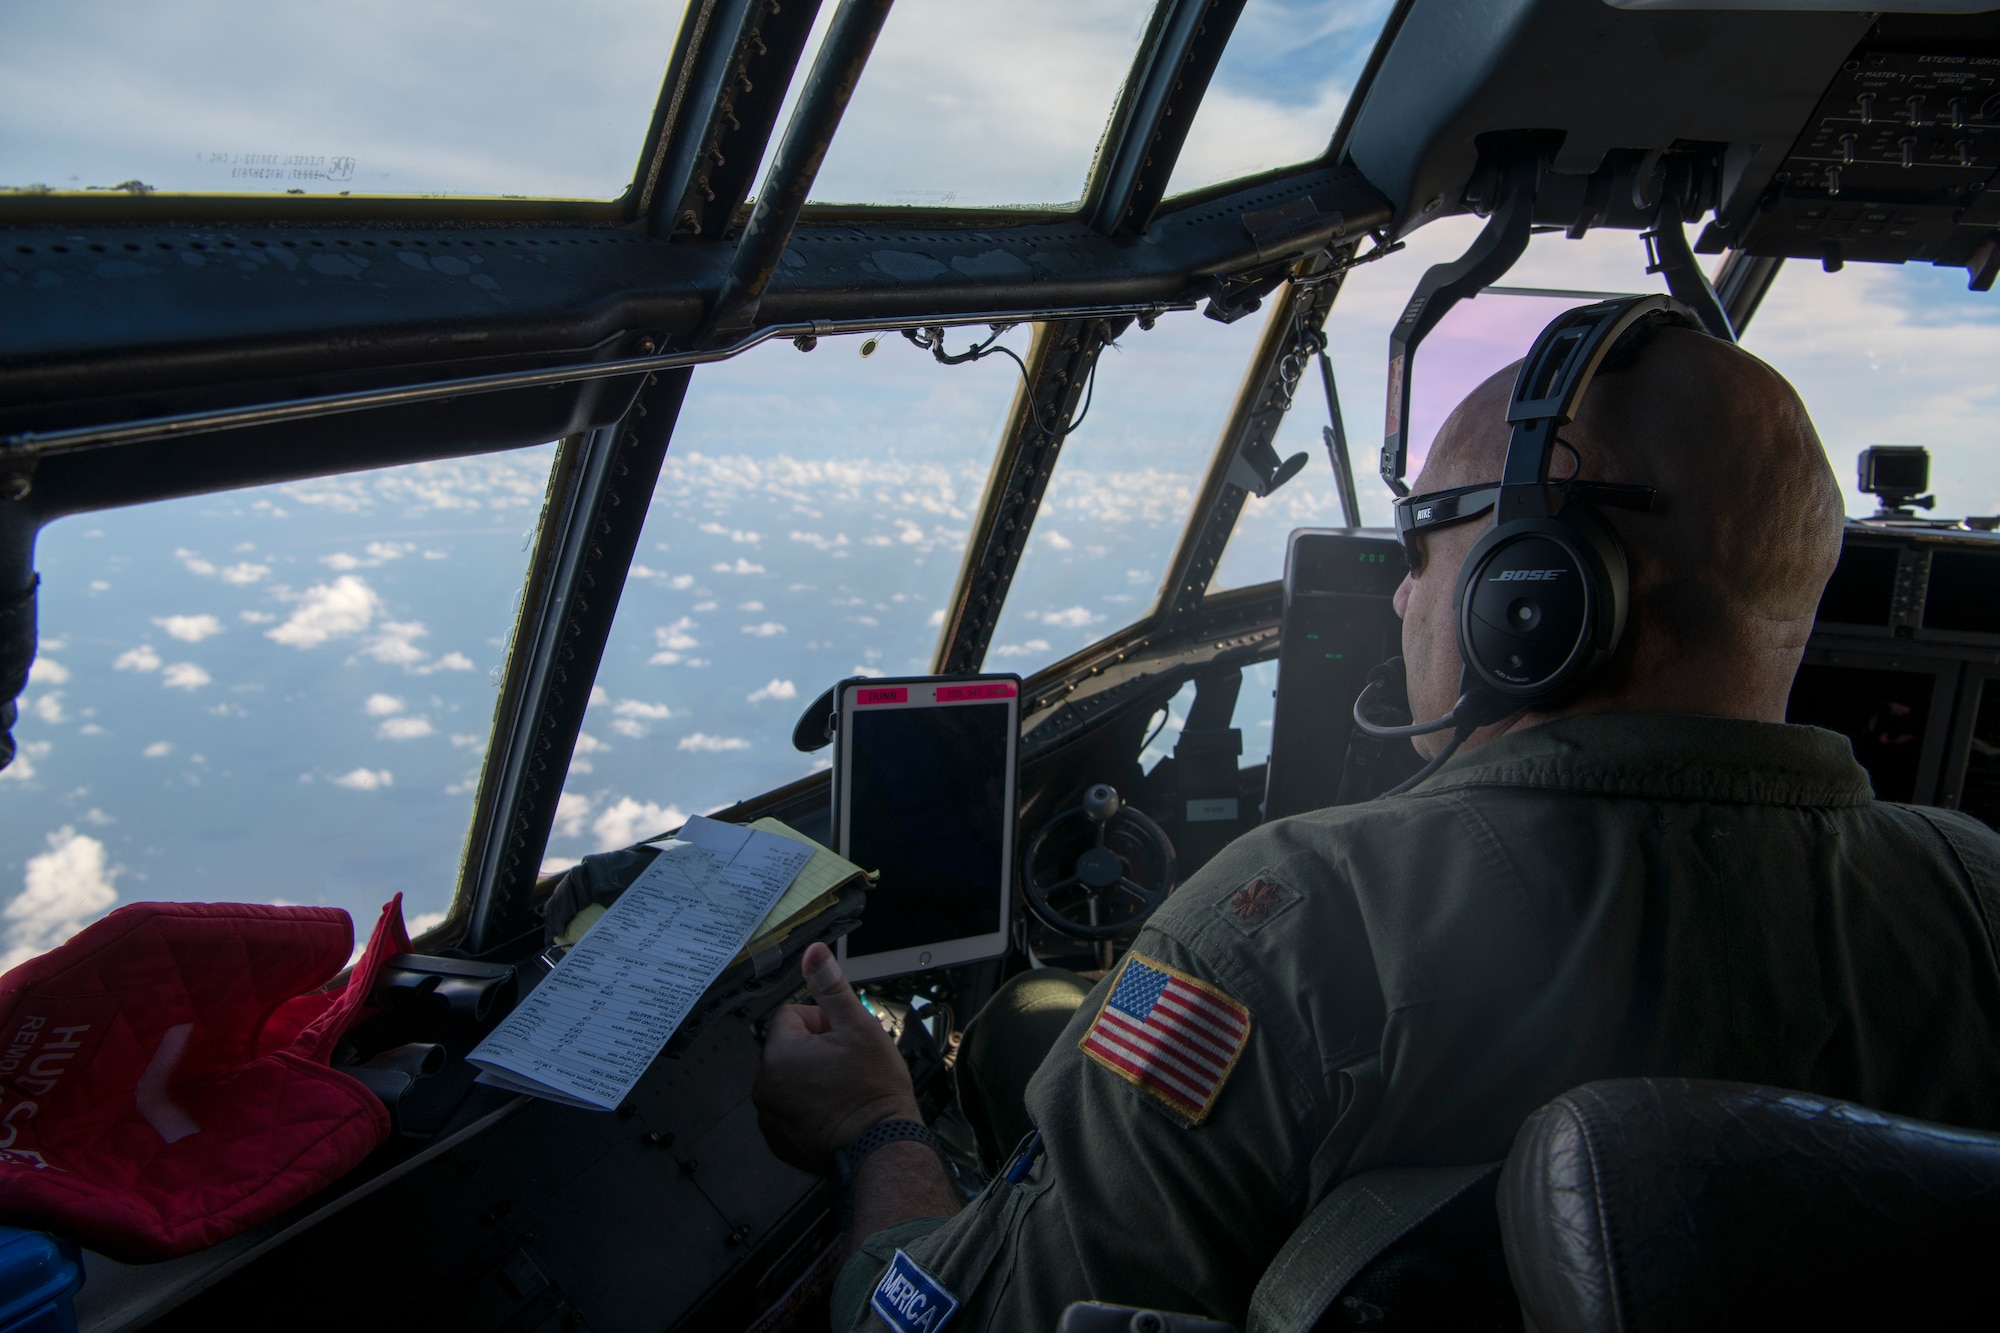 Maj. Kendall Dunn, 53rd Weather Reconnaissance Squadron pilot, looks out the port side of a WC-130J Super Hercules aircraft June 5, 2020 in the Gulf of Mexico. The Hurricane Hunters were tasked to fly a fixed mission to locate the center of Tropical Storm Cristobal and the data gathered was sent to the National Hurricane Center for their weather model forecasts. (U.S. Air Force Photo by Tech. Sgt. Christopher Carranza)